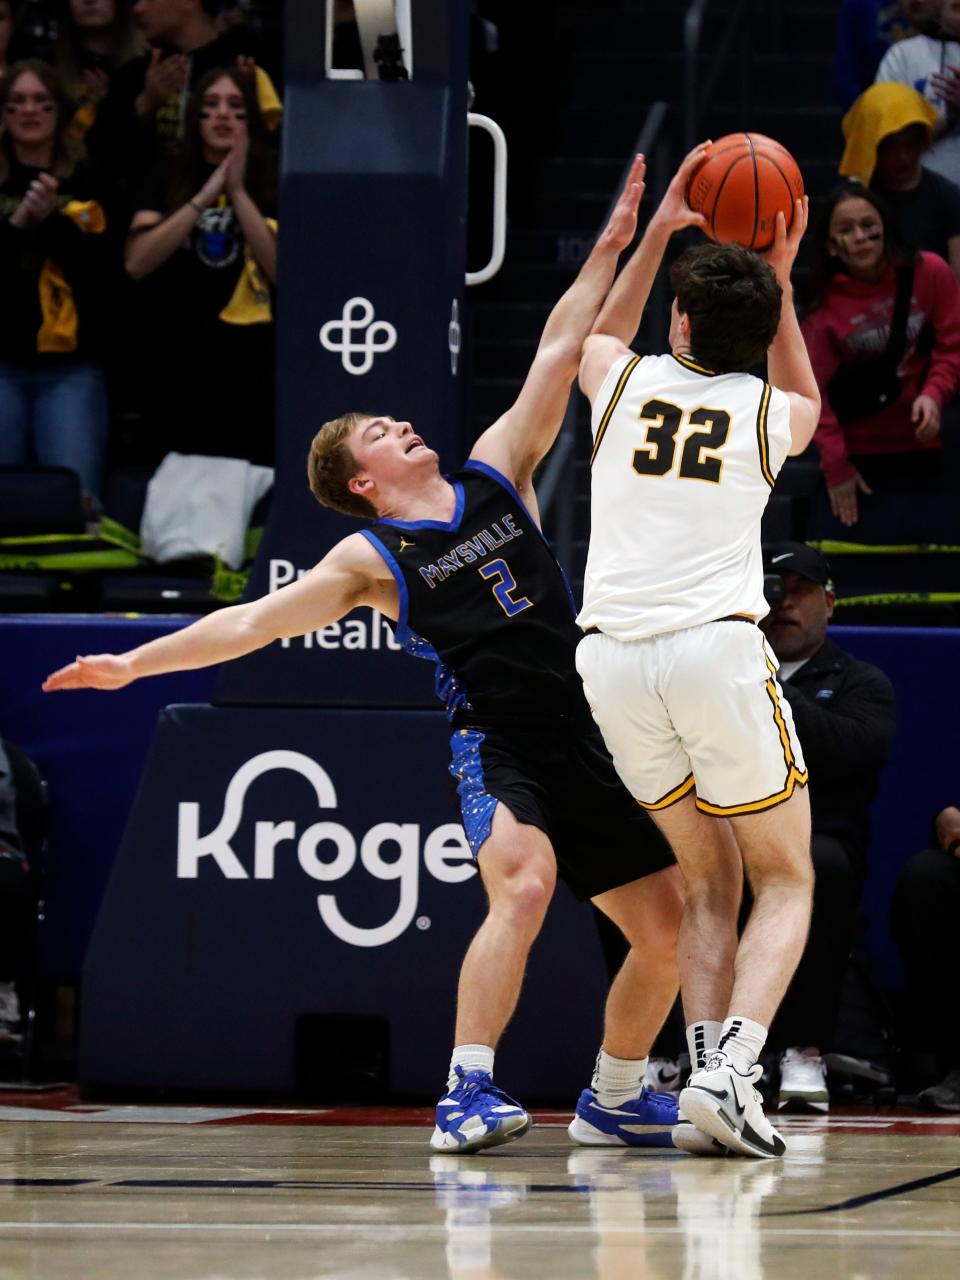 Wesley Armstead defends Charlie Uhl during Maysville's 68-54 loss to Kettering Alter during the Division II state finals on Sunday at University of Dayton Arena.